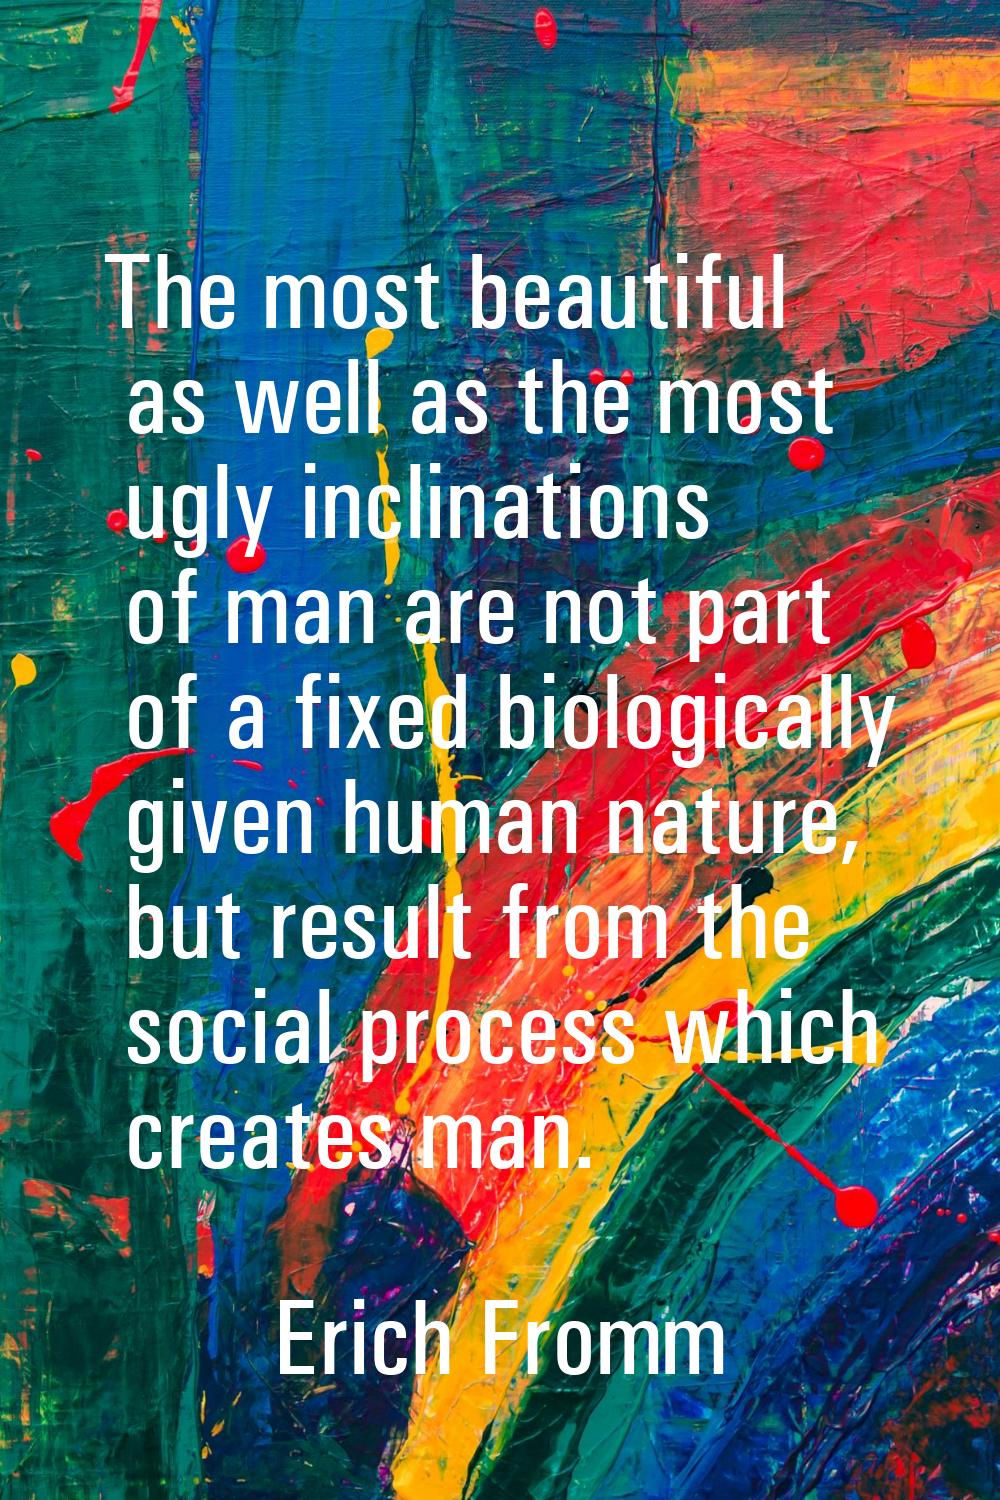 The most beautiful as well as the most ugly inclinations of man are not part of a fixed biologicall